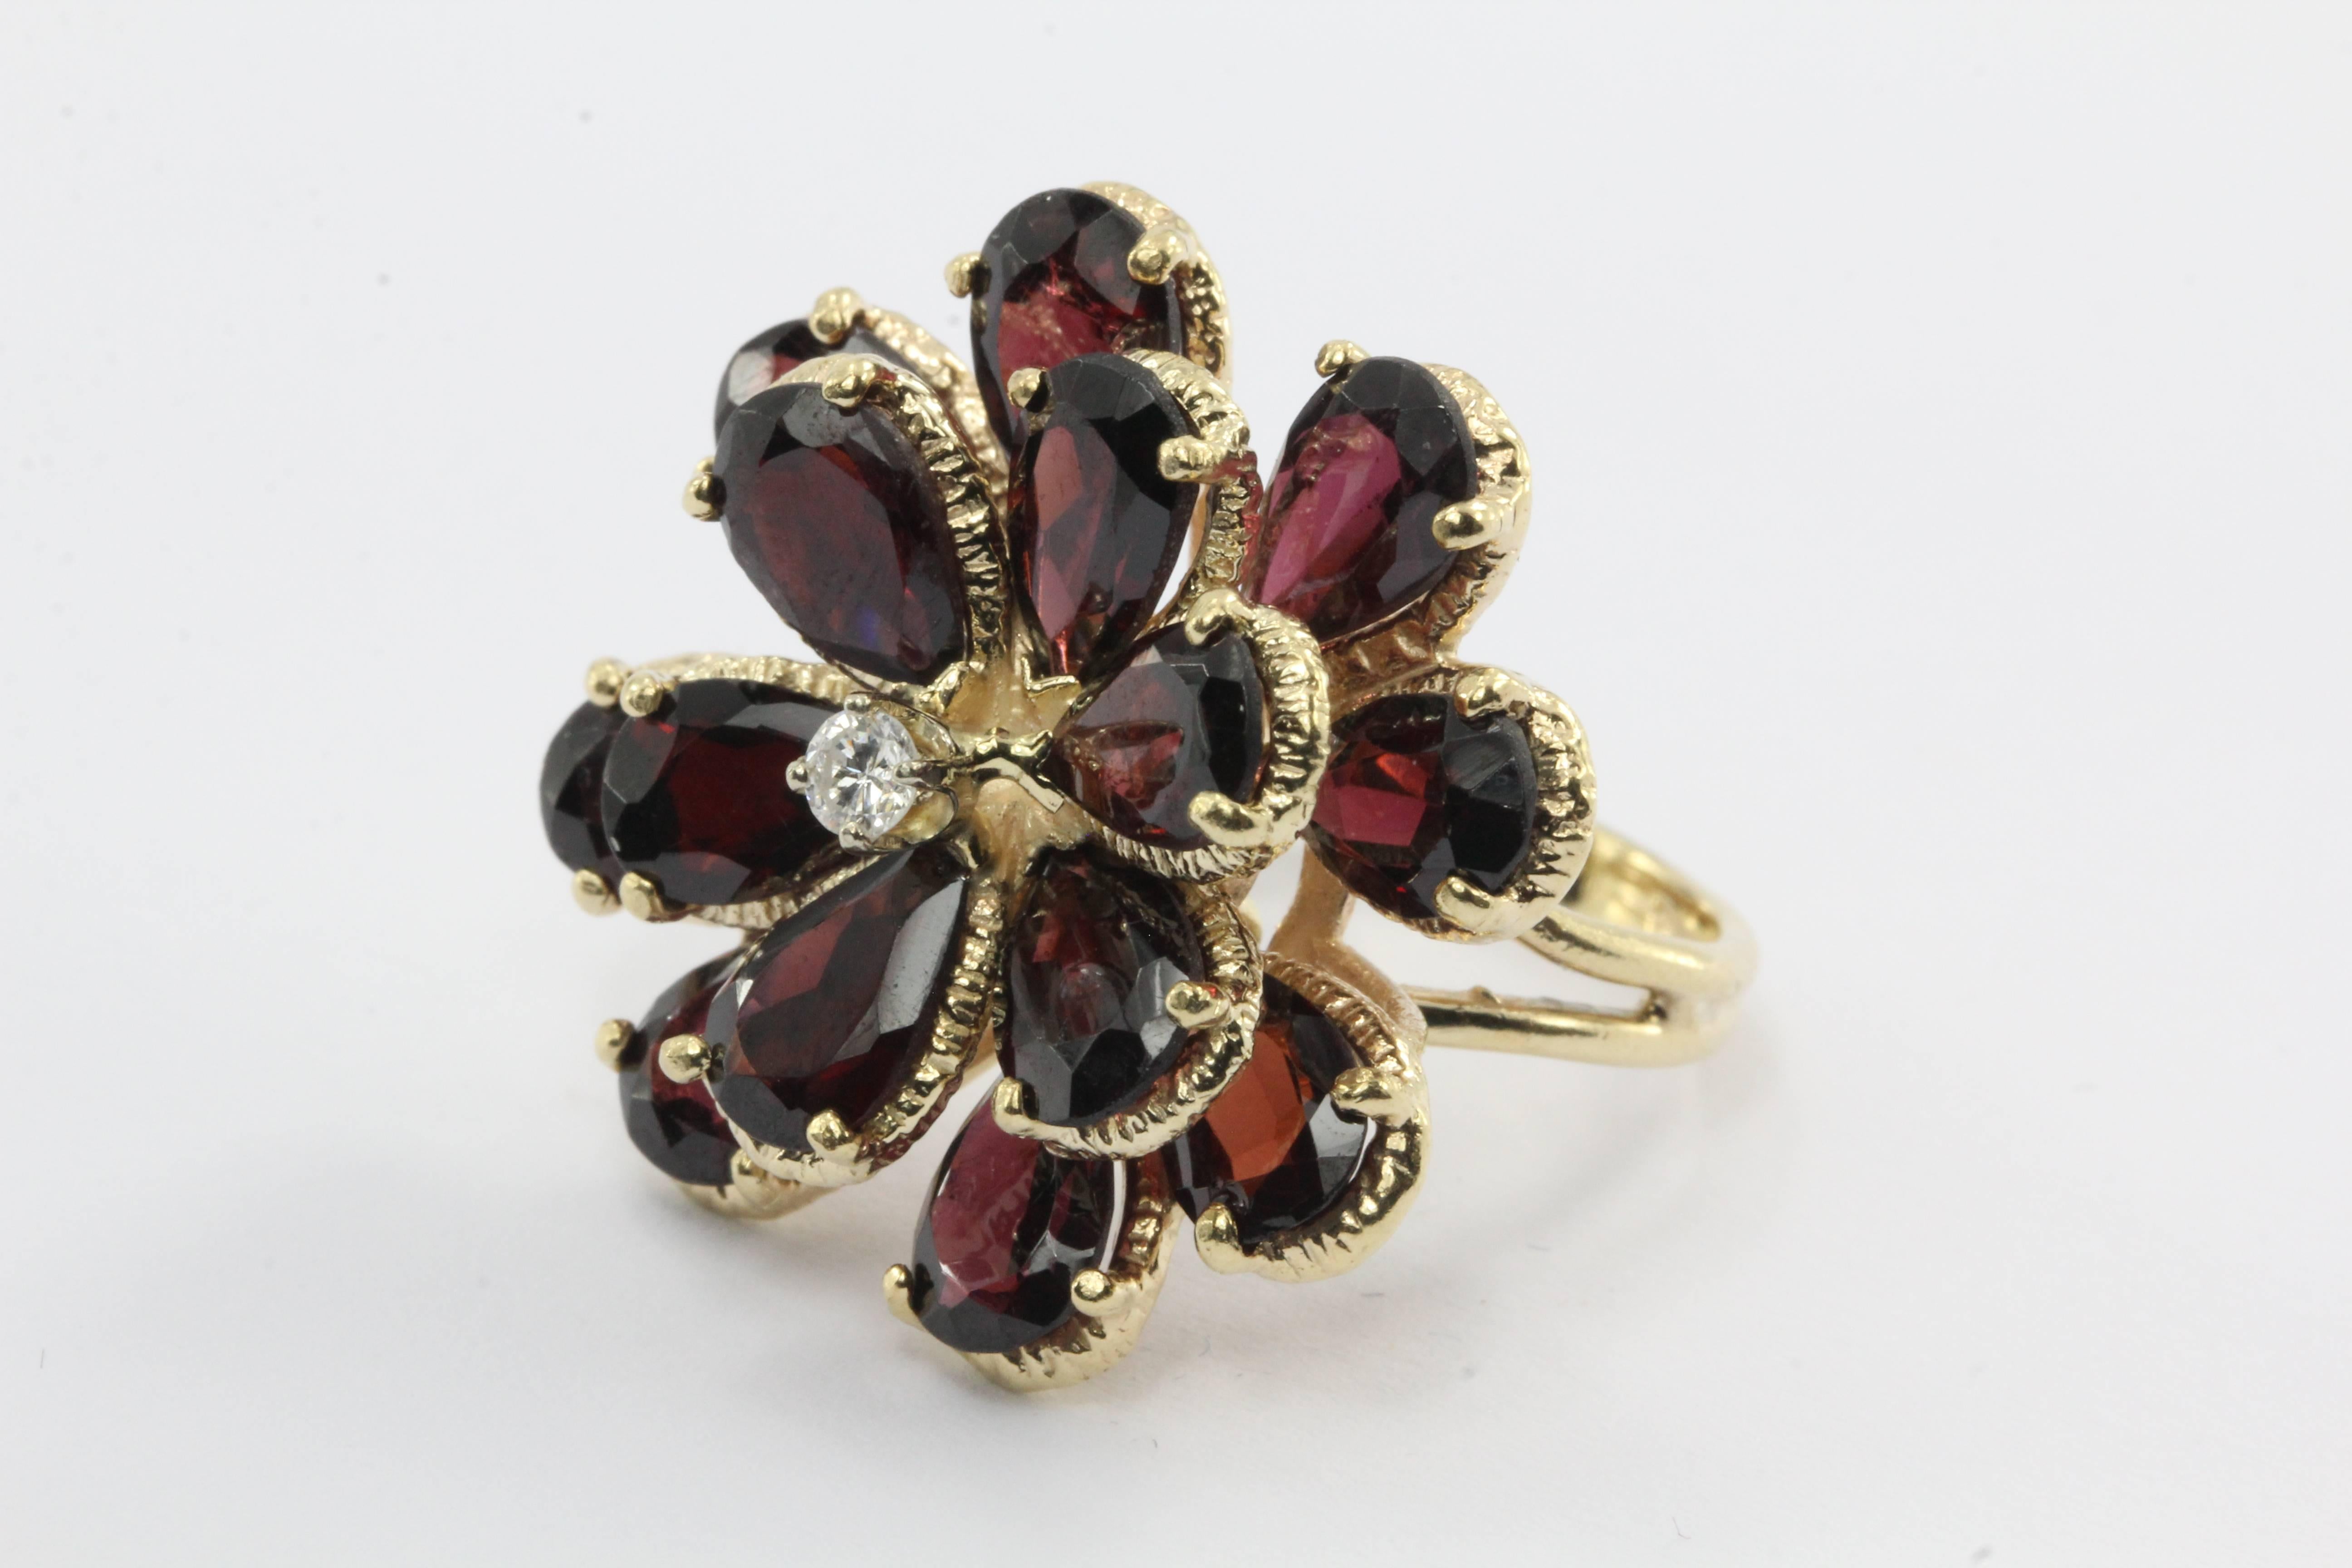 A retro floral garnet & diamond ring in 14k yellow gold circa 1950. This gorgeous vintage ring holds a stunning array of deep rich pear shaped garnets. There are 14 garnet petals in total. The stones are each approximately 8 MM in length and 5 MM in